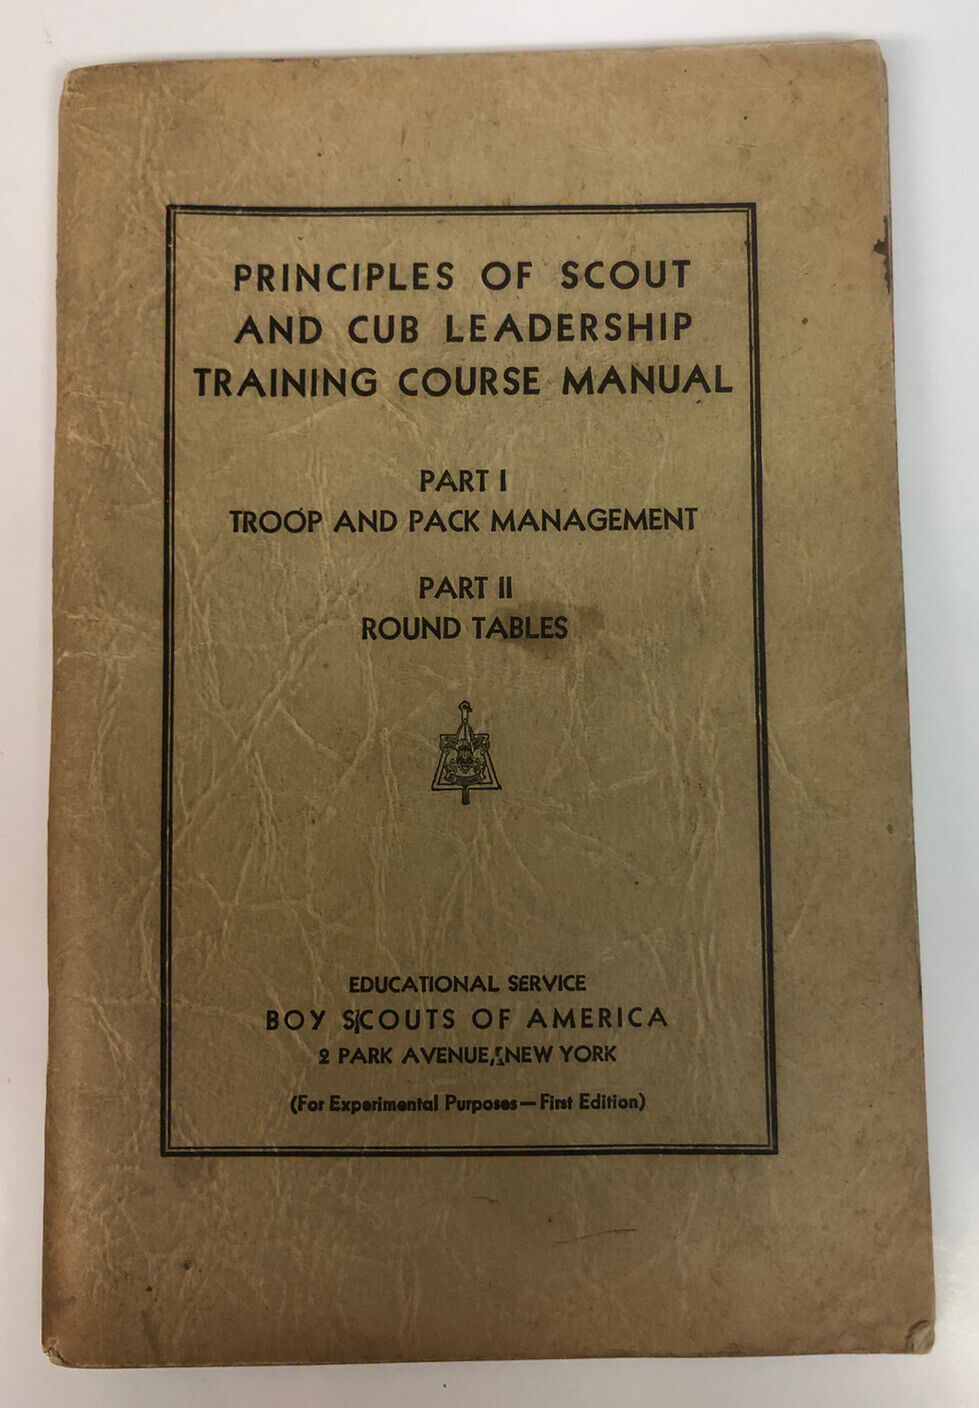 Principles Of Scout and Cub Leadership Training Course Manual—First Edition 